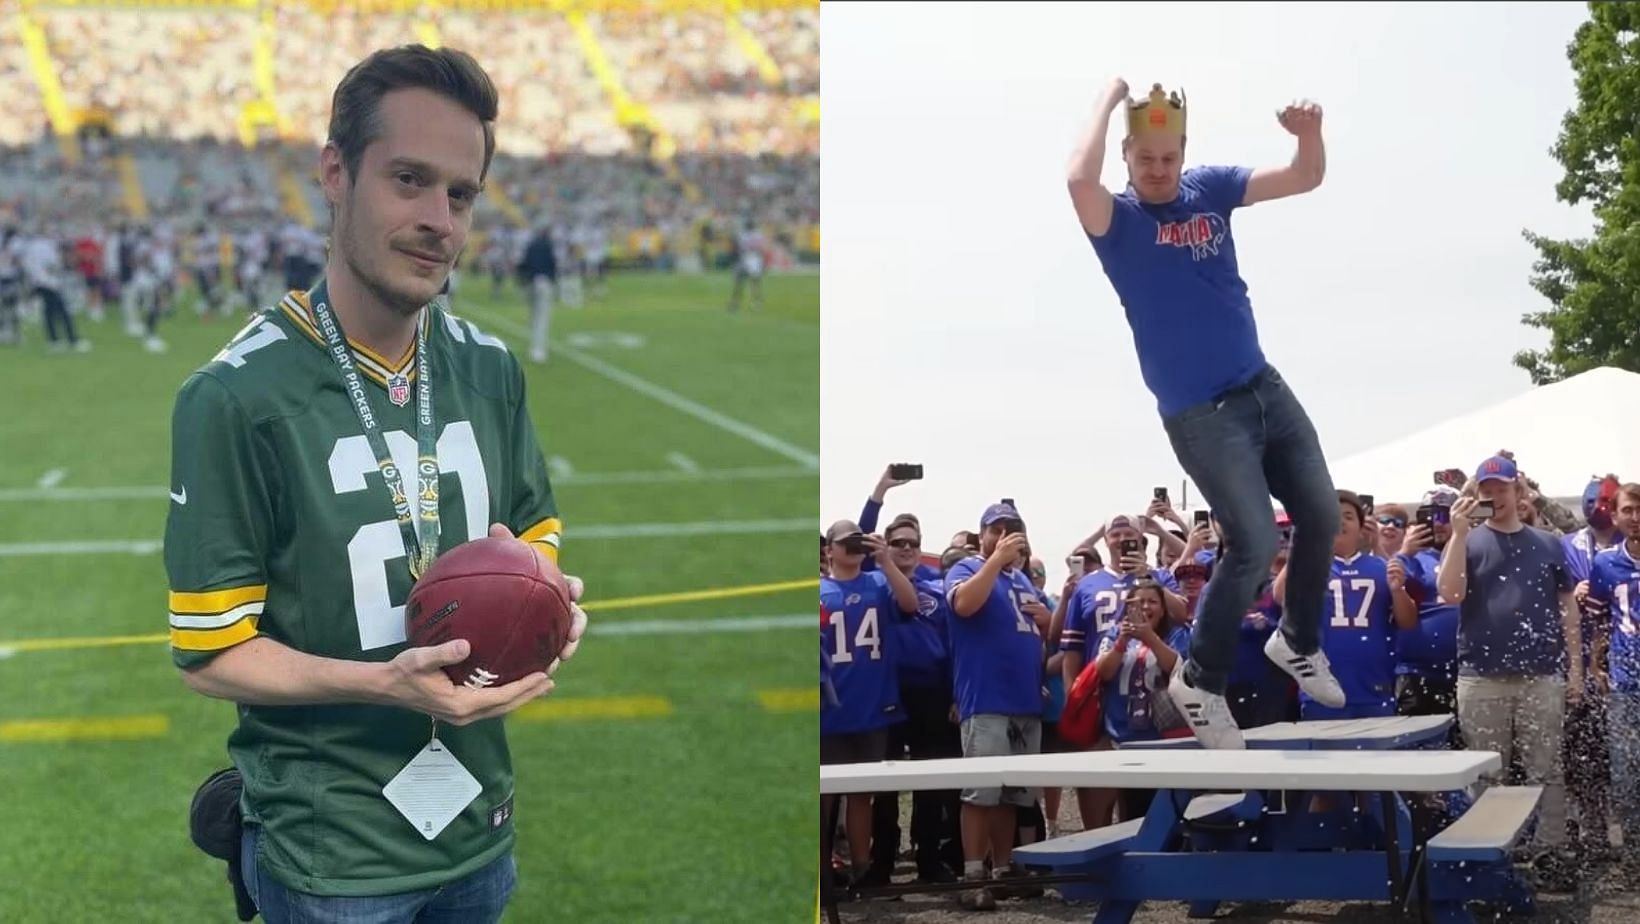 Tom Grossi followed the example of Bills fans